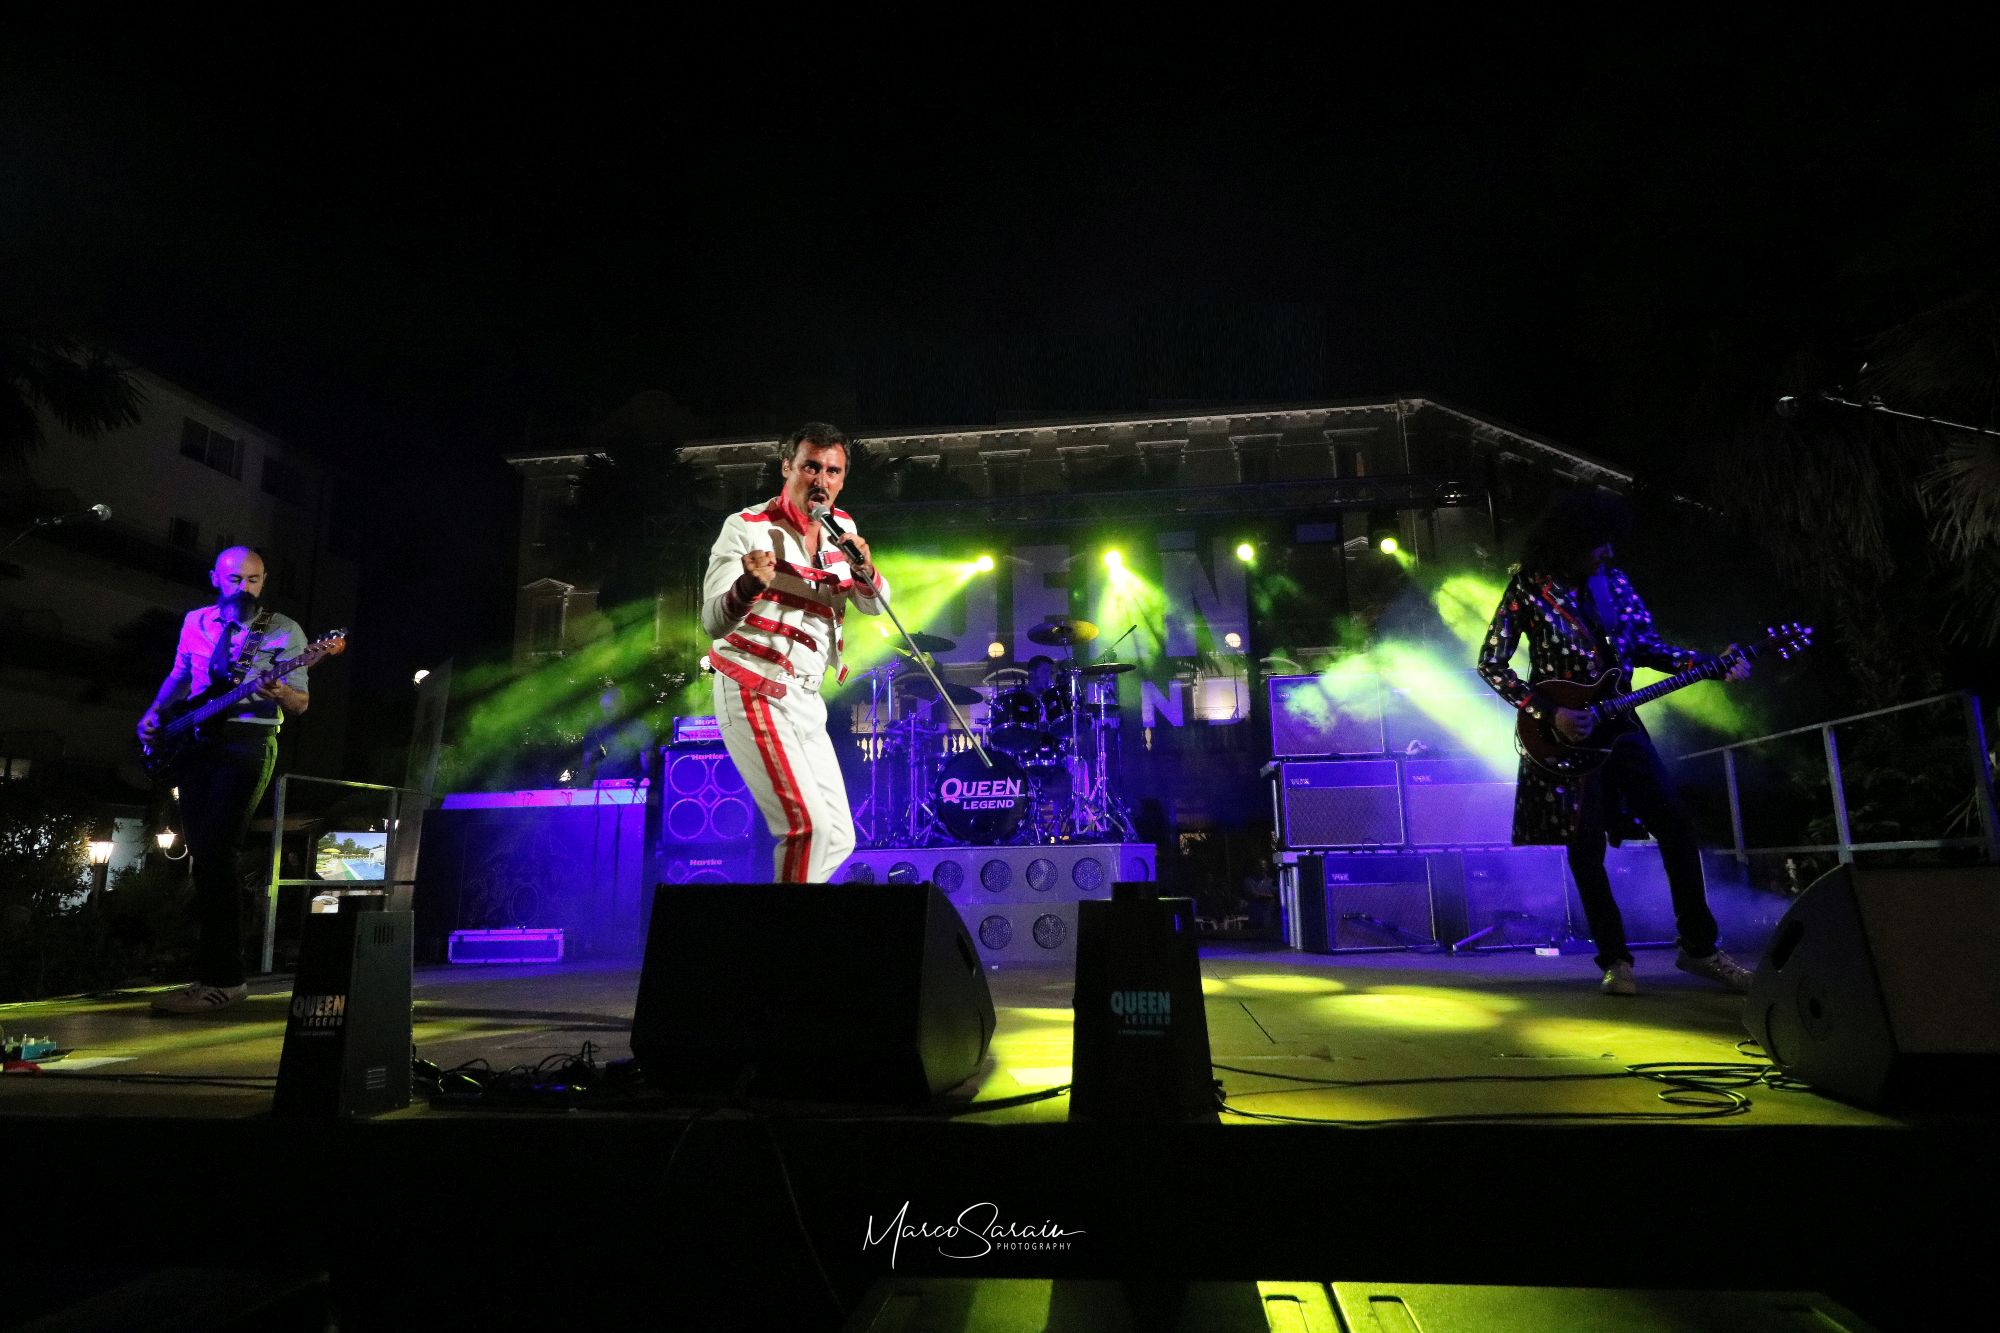 Queen Legend - Tribute Band @ Abano Terme 2019